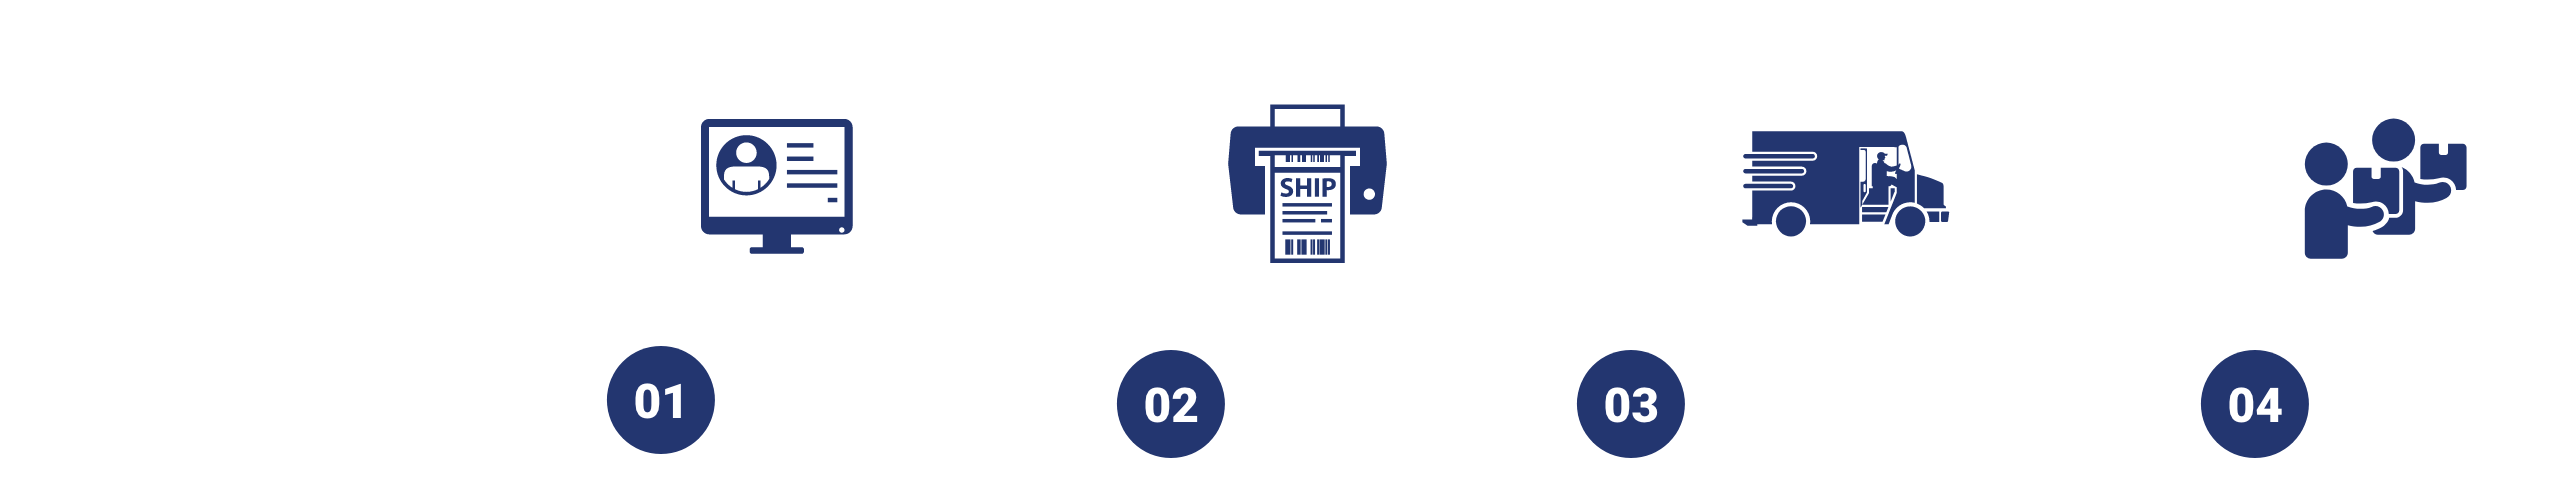 Infographic explaining how 'Ship to School' works. Step 1 is to sign up and order supplies. Step 2 is to pack and print labels. Step 3 is having FedEx pick it up. Step 4 is having us deliver it.